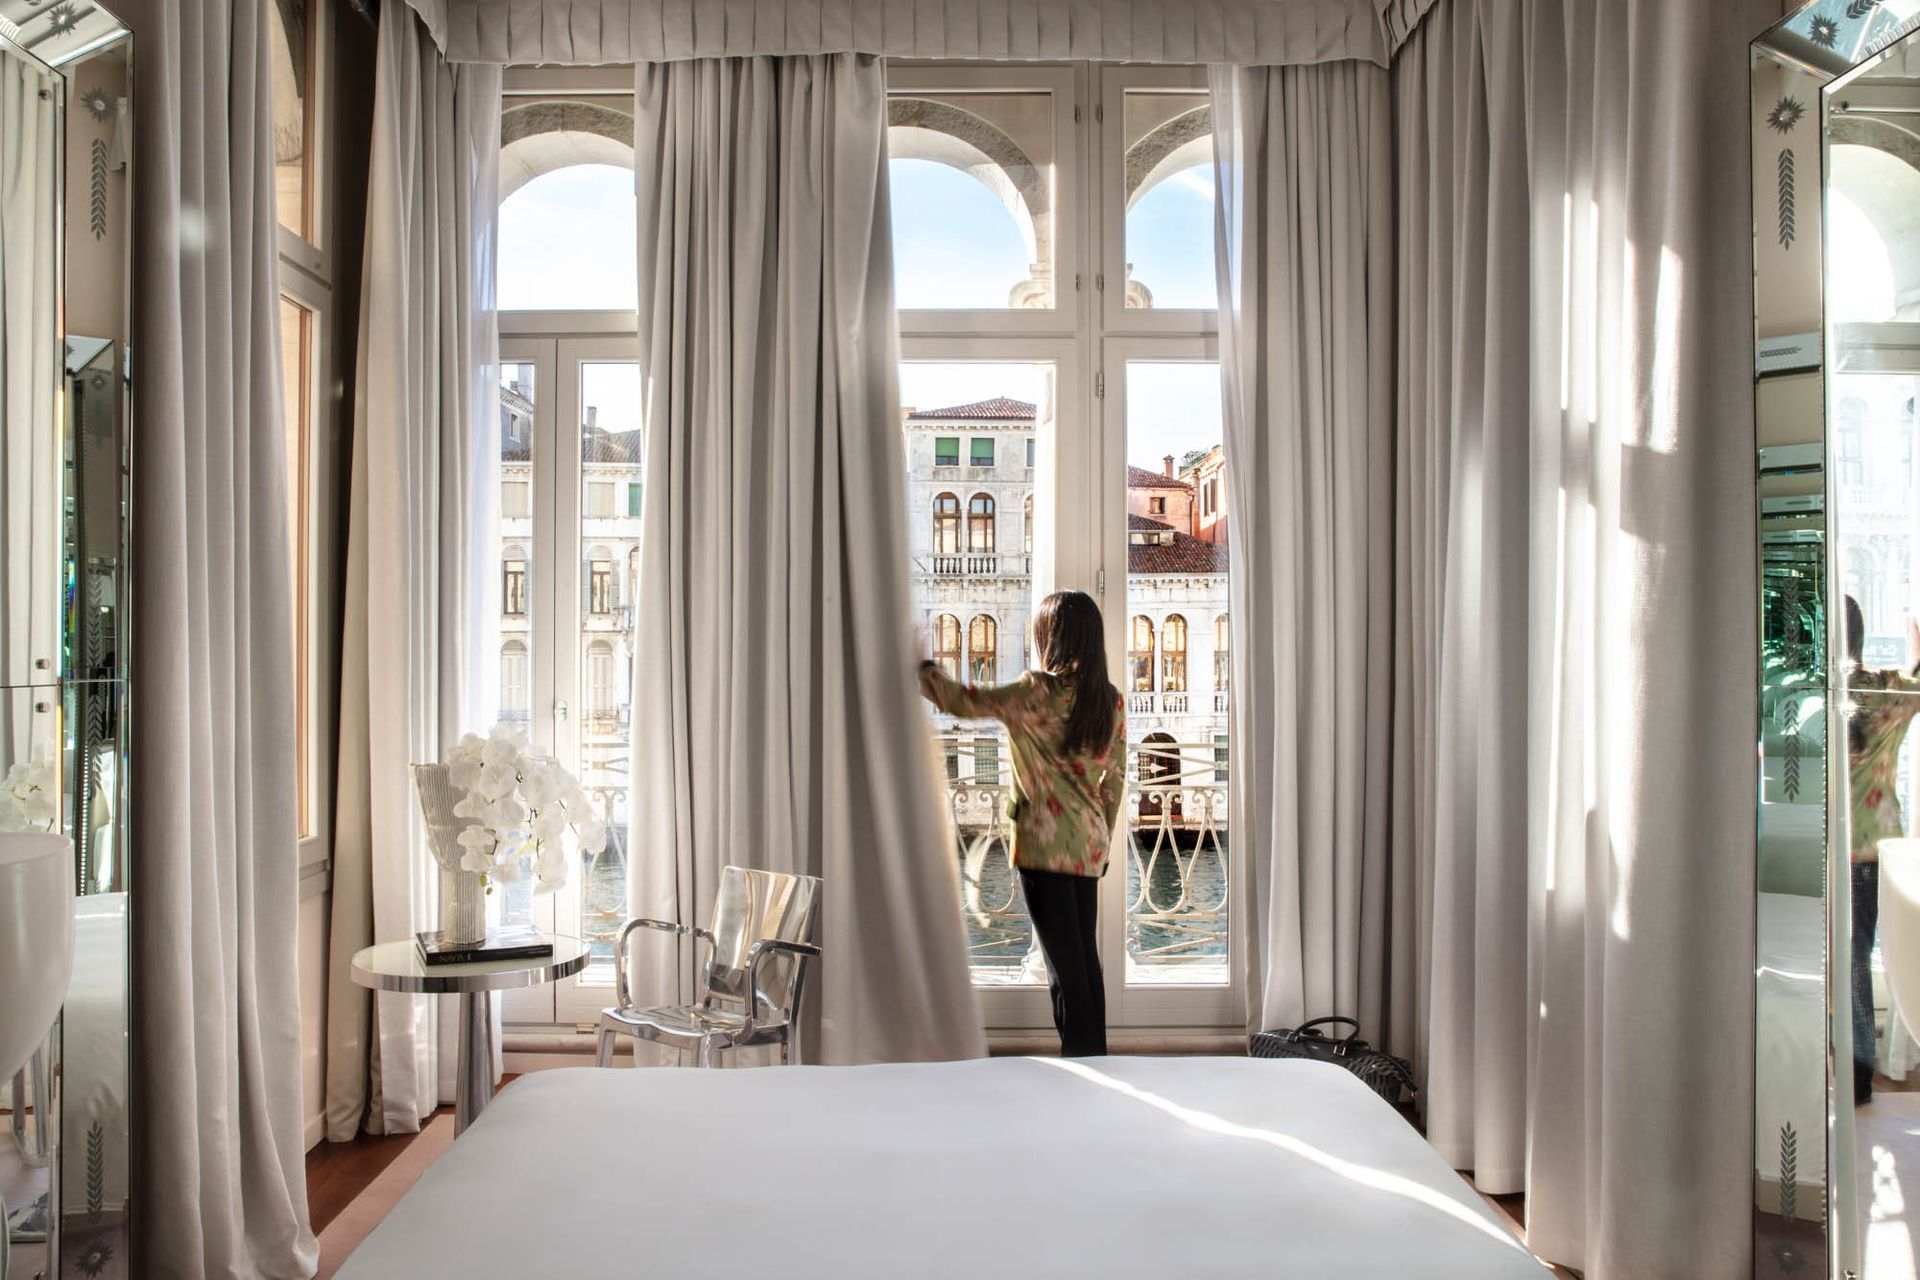 Sweet Suite Life: Exclusive Offer available on Palazzina Grassi Official Website. Book Here Now!
